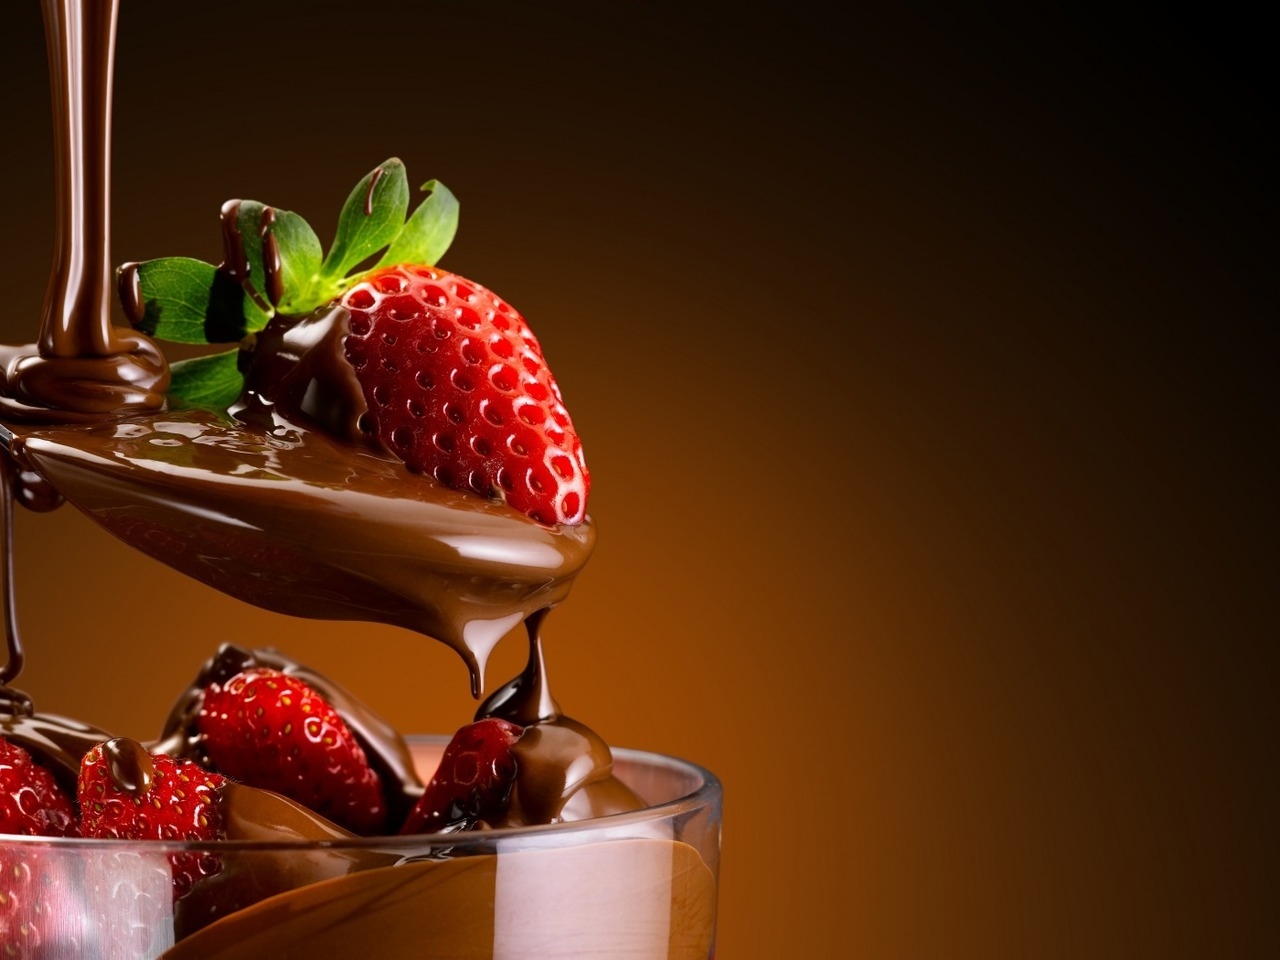 Chocolate and Strawberries Dessert for 1280 x 960 resolution